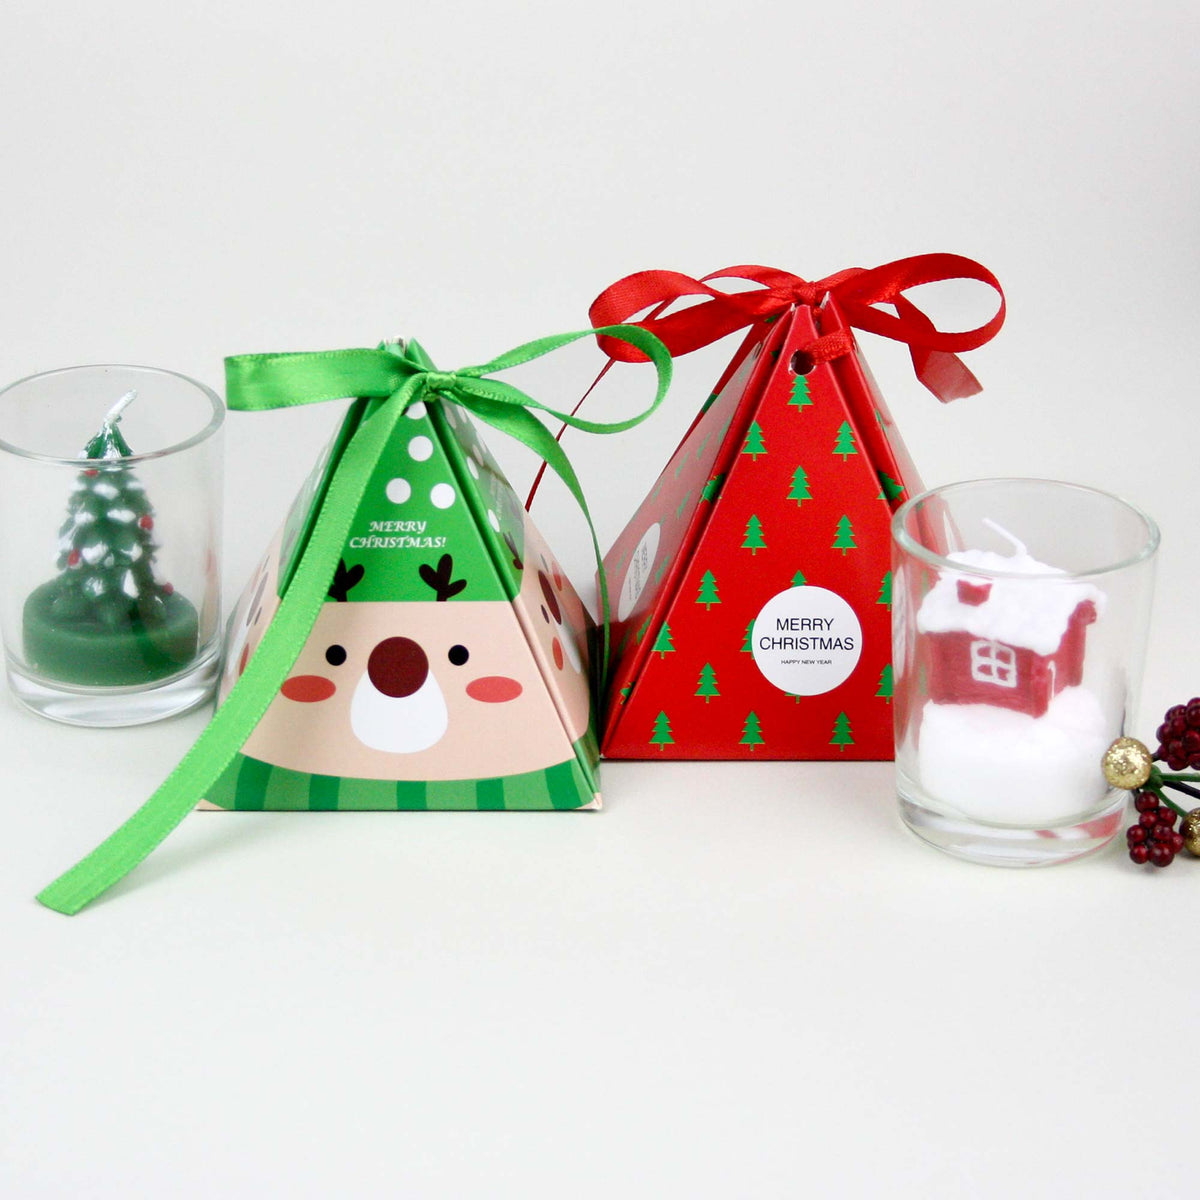 Christmas Cone Candy Treat Gift Box With Ribbon - Pack of 24